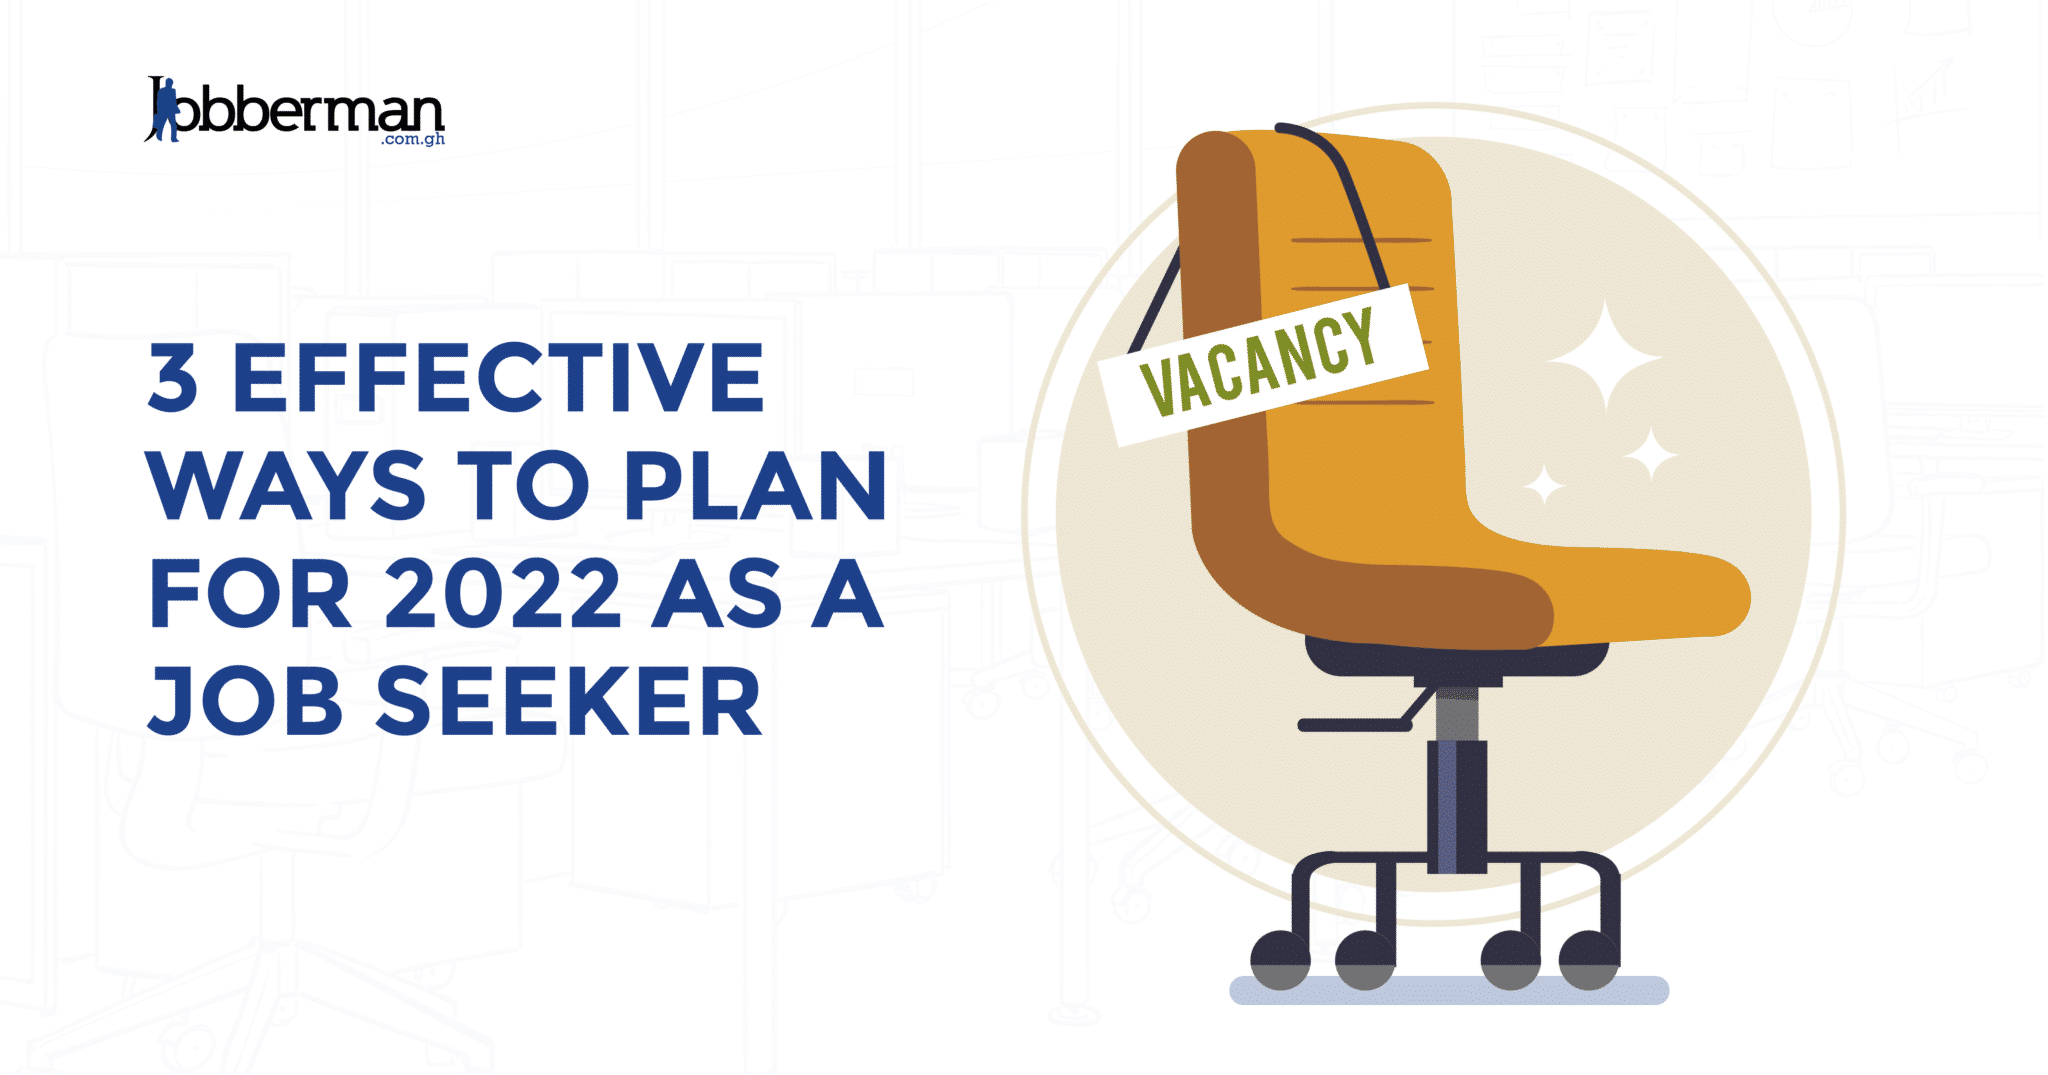 Effective ways to plan for 2022 as a Job Seeker